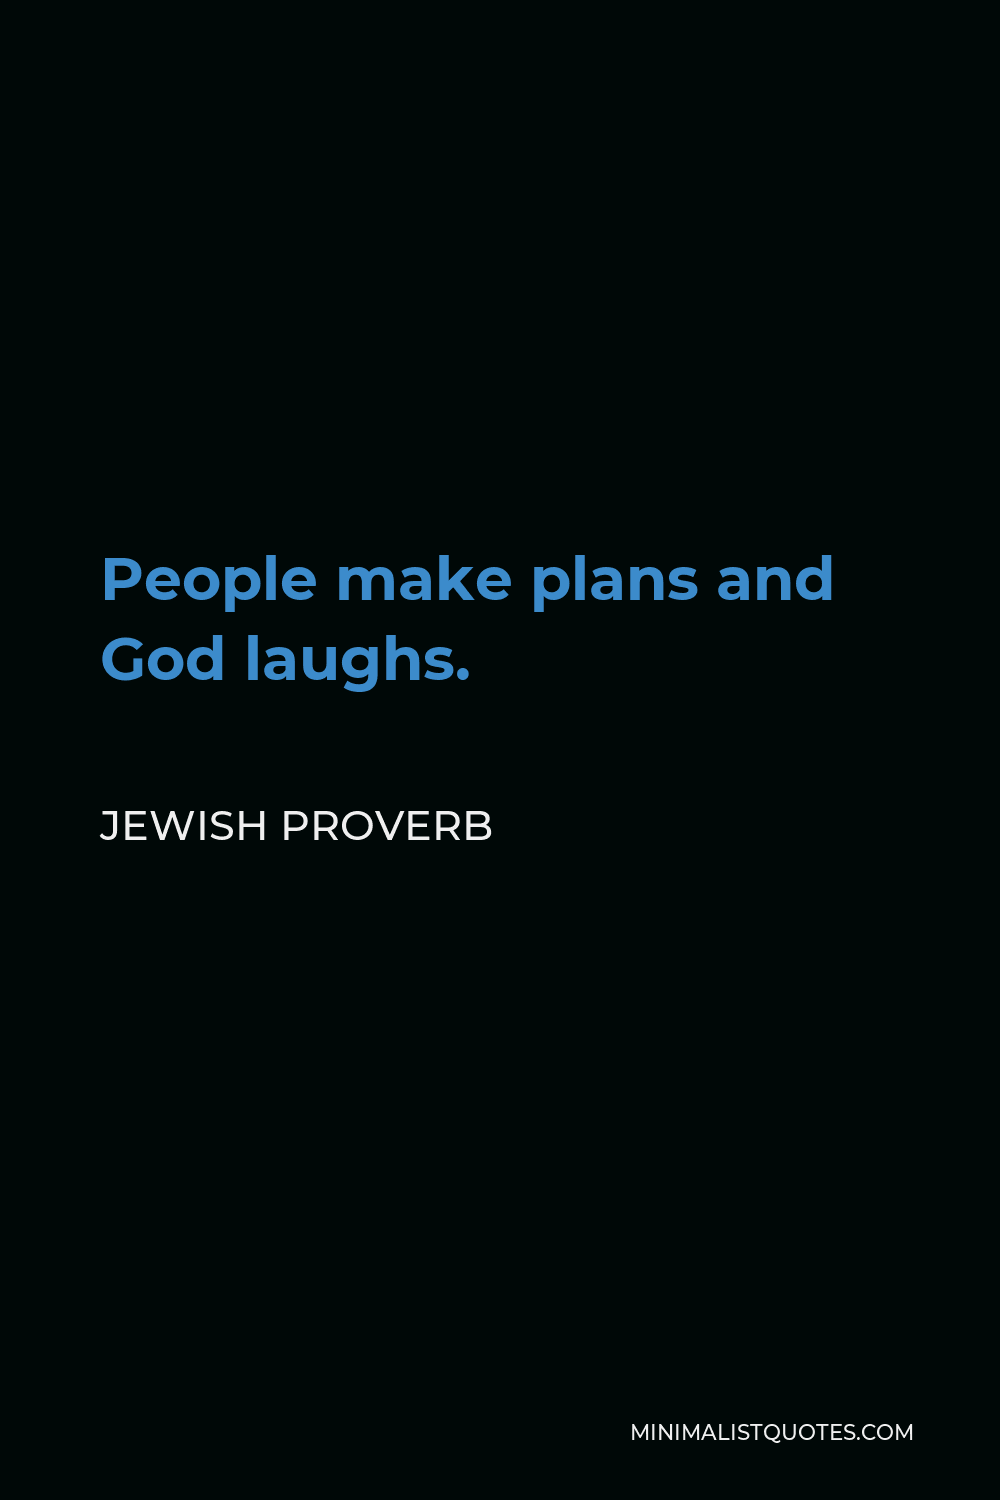 Jewish Proverb Quote - People make plans and God laughs.